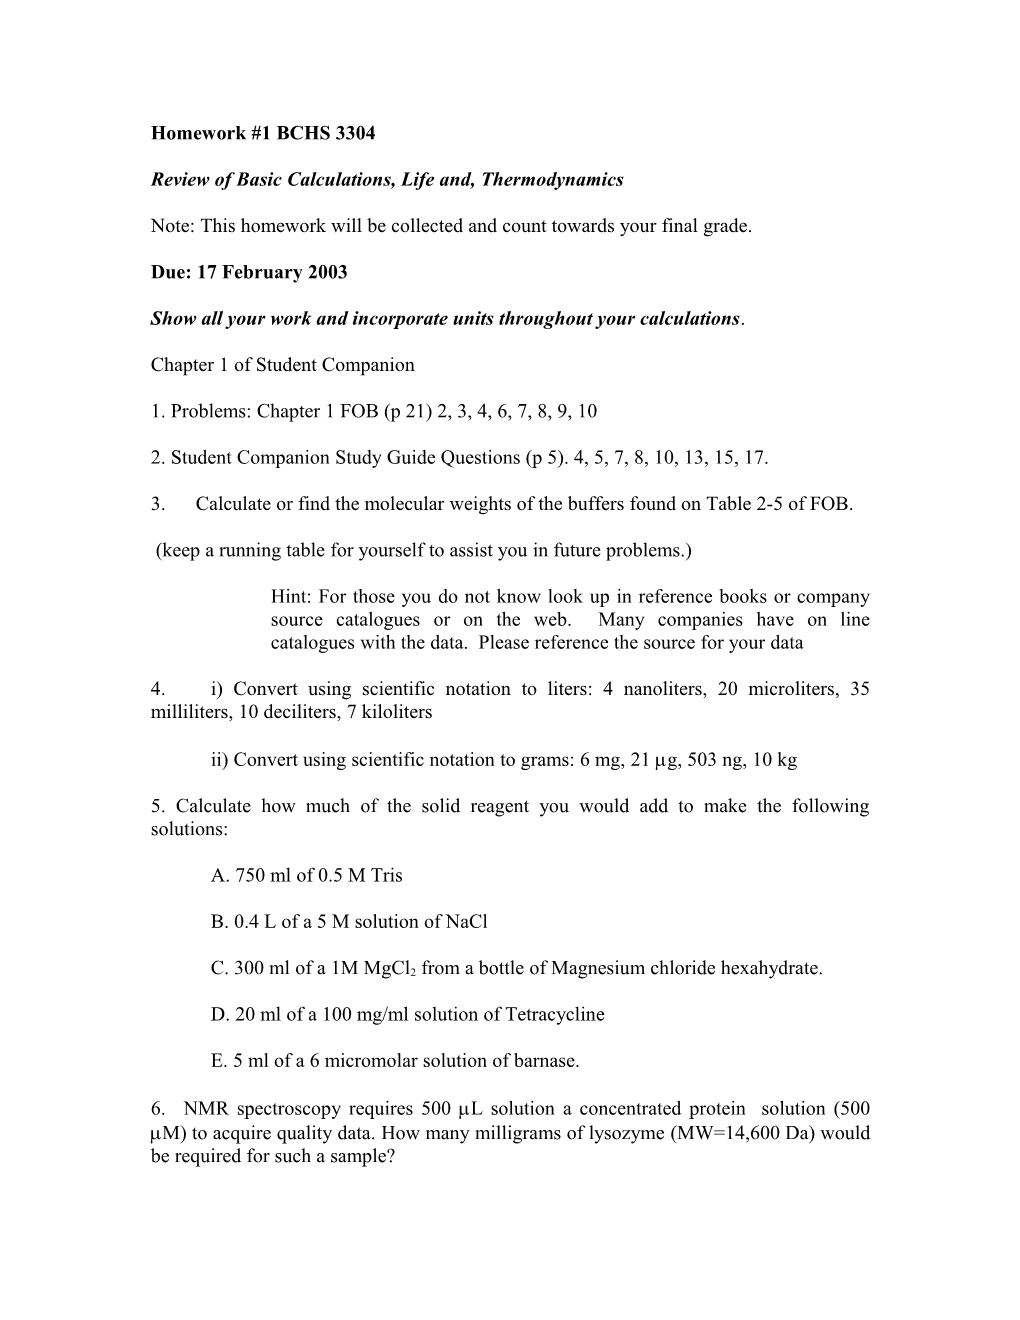 Review of Basic Calculations, Life And, Thermodynamics